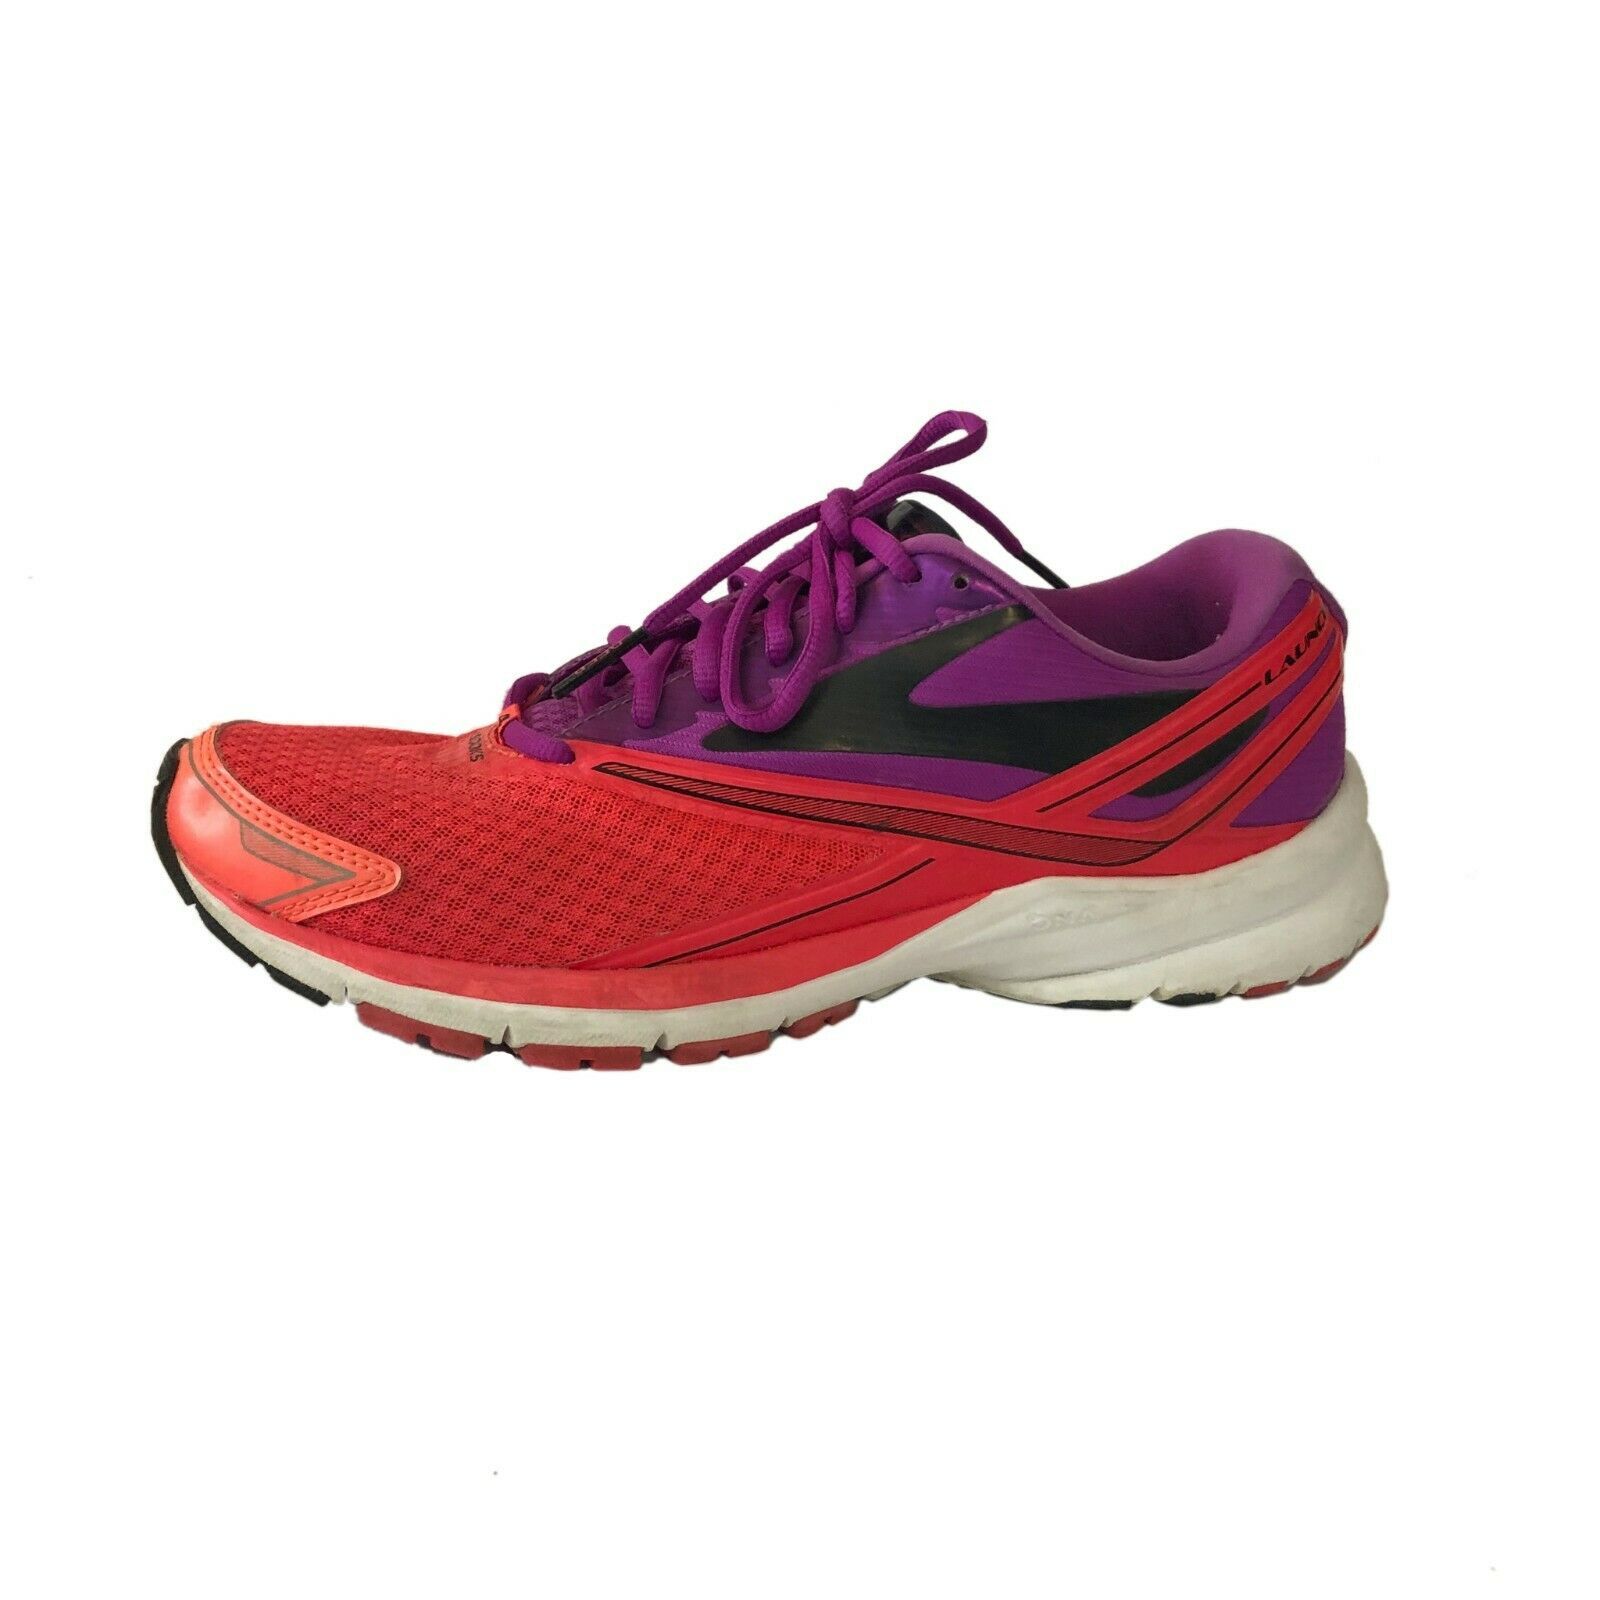 Brooks LAUNCH 4 DNA Running Sneakers Salmon Womens Shoe Size 9.5 | 3227 ...